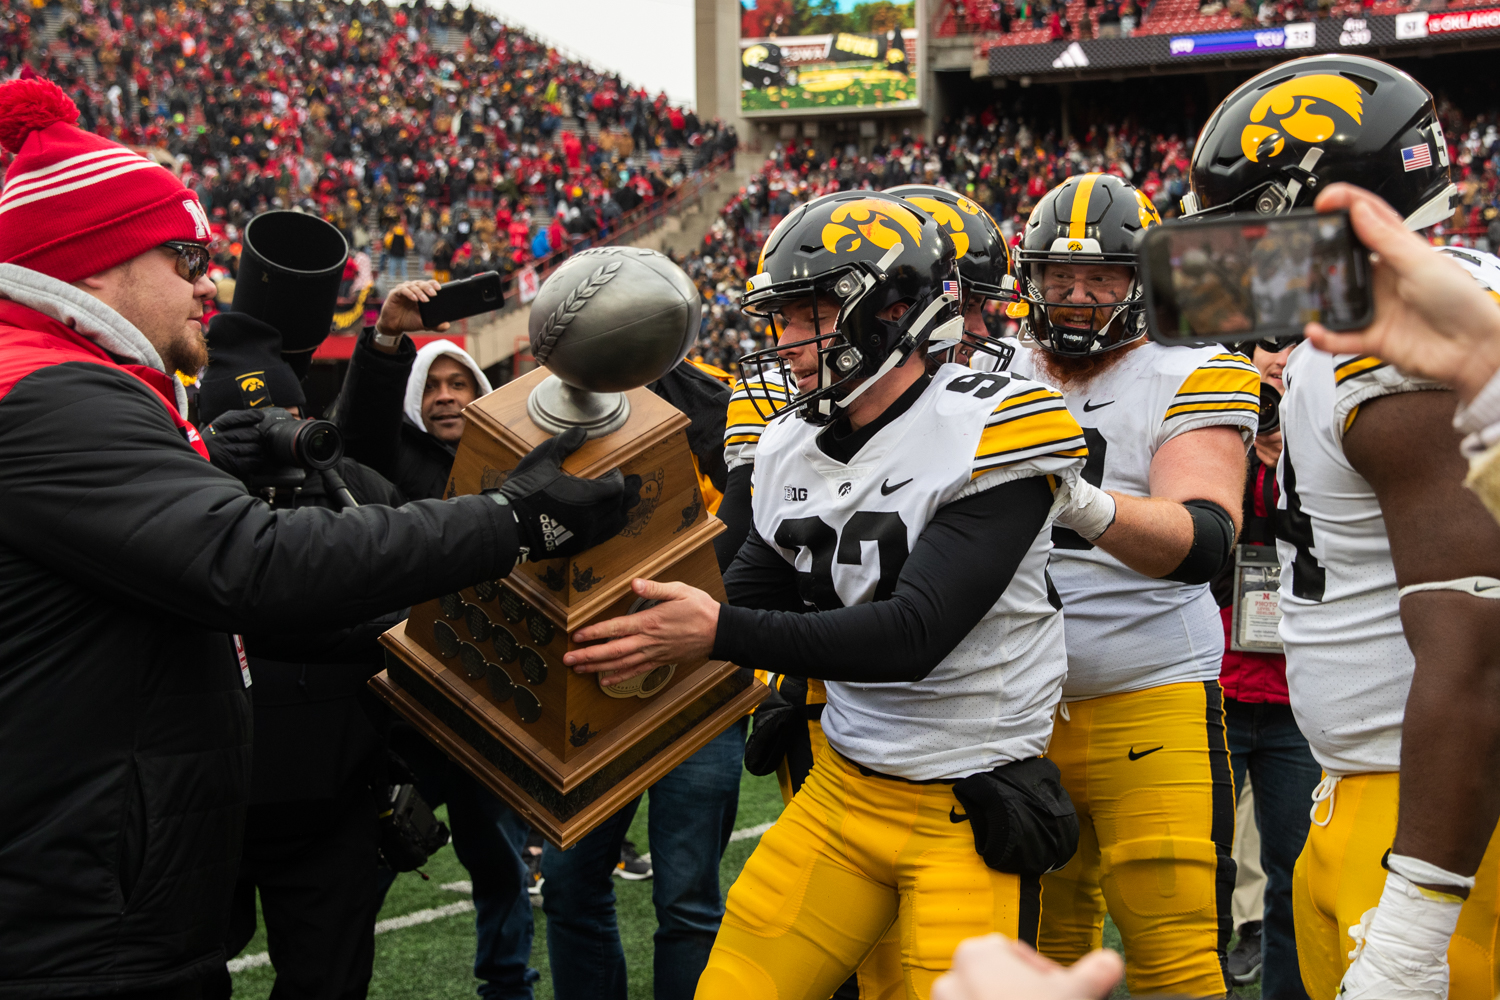 Iowa kicker Marshall Meeder receives the Heroes Trophy after kicking the game winning field goal during a football game between No. 17 Iowa and Nebraska at Memorial Stadium in Lincoln, Neb., on Friday, Nov. 23, 2023. The Hawkeyes defeated the Cornhuskers 13-10.